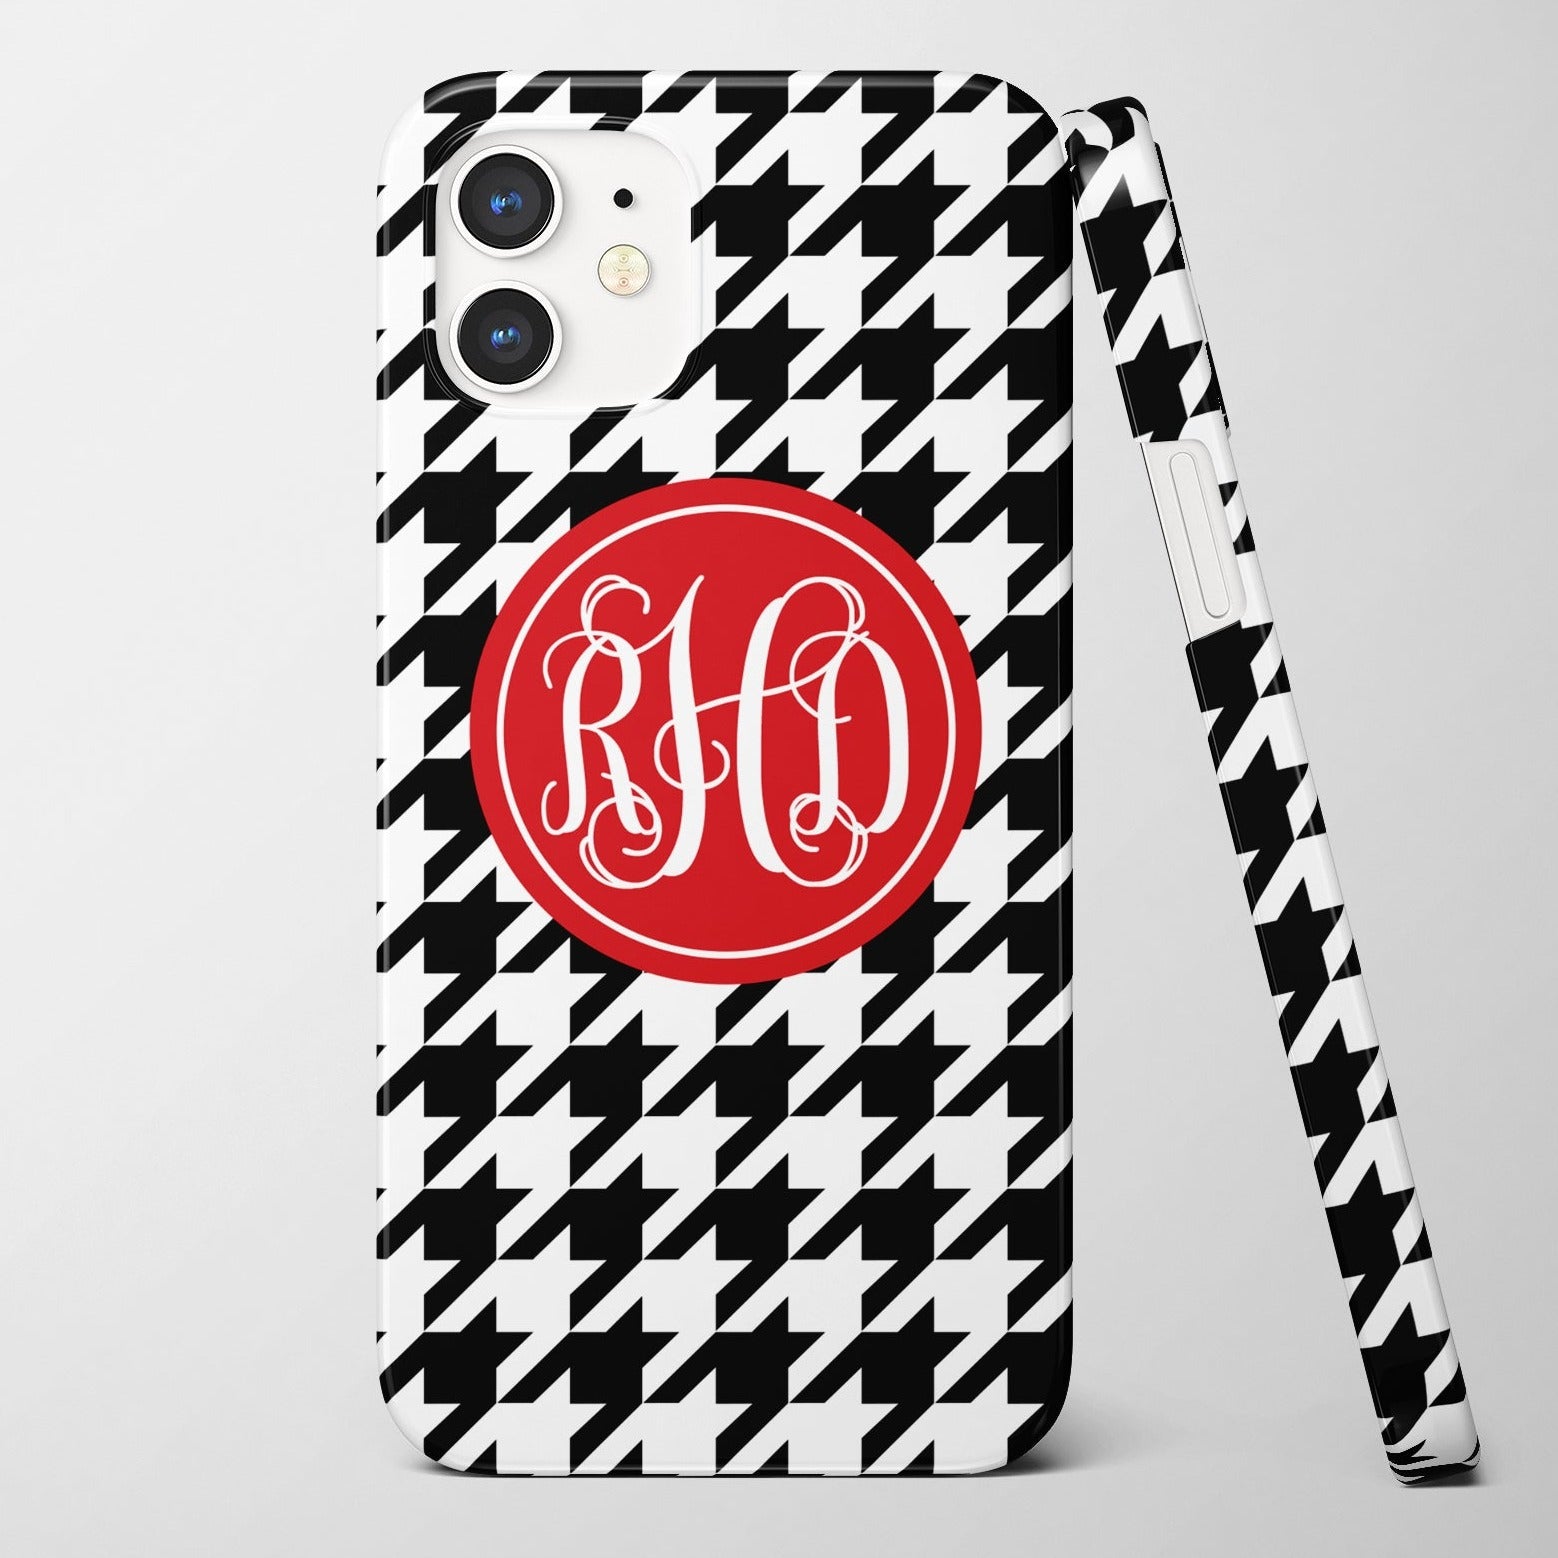 iPhone 15 houndstooth case with red monogram, you can chose custom color schemes. Also available for earlier iPhone models